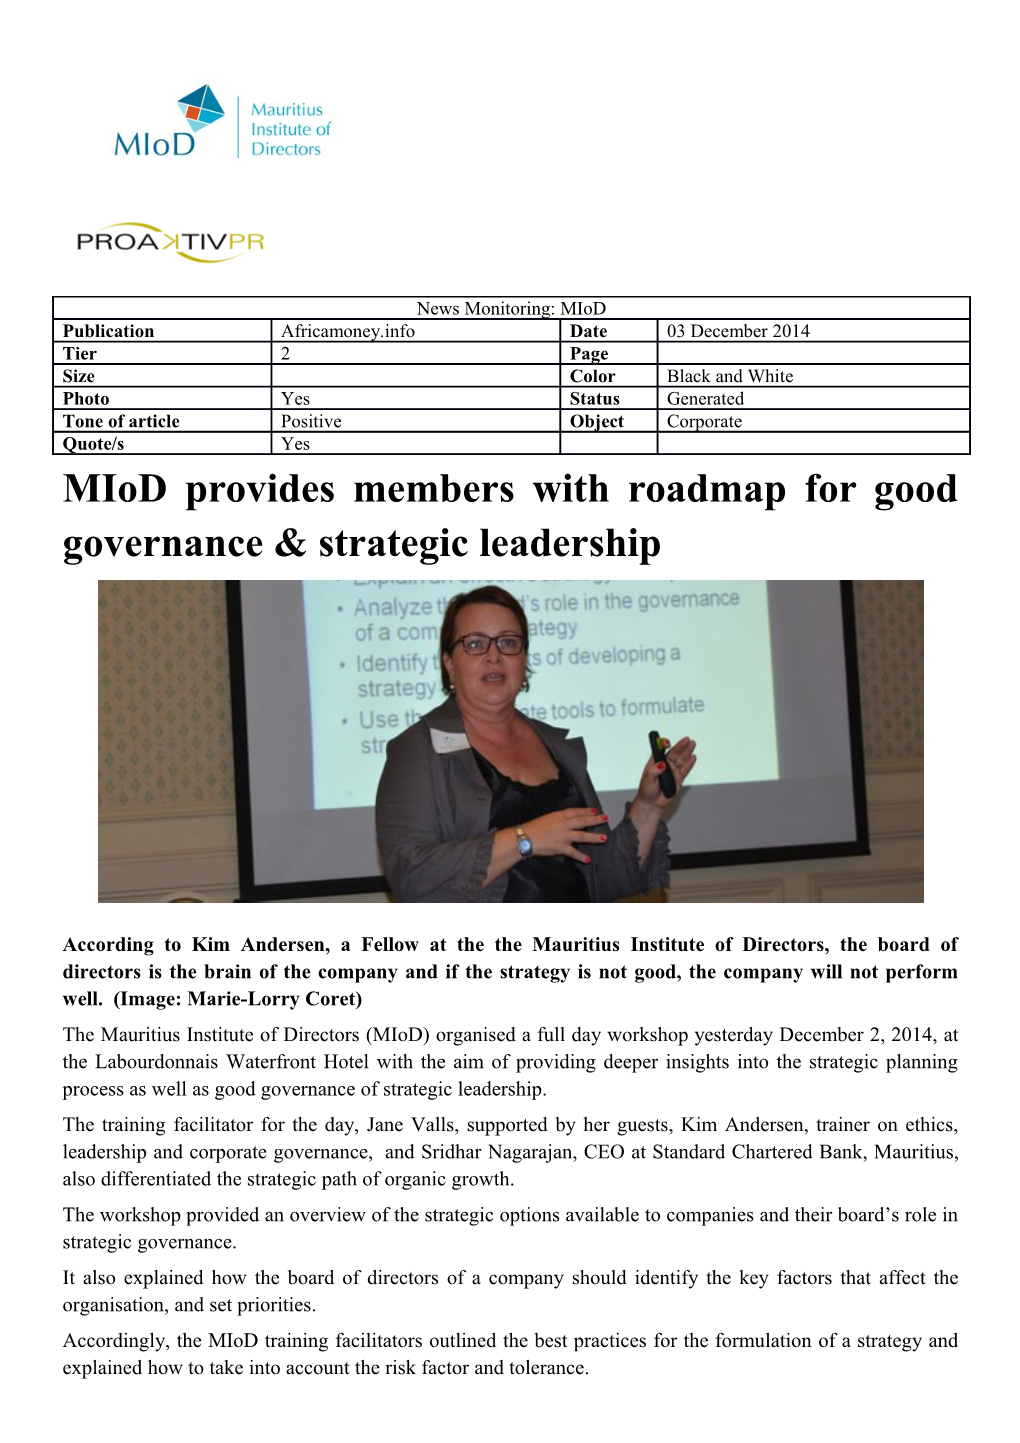 Miod Provides Members with Roadmap for Good Governance & Strategic Leadership